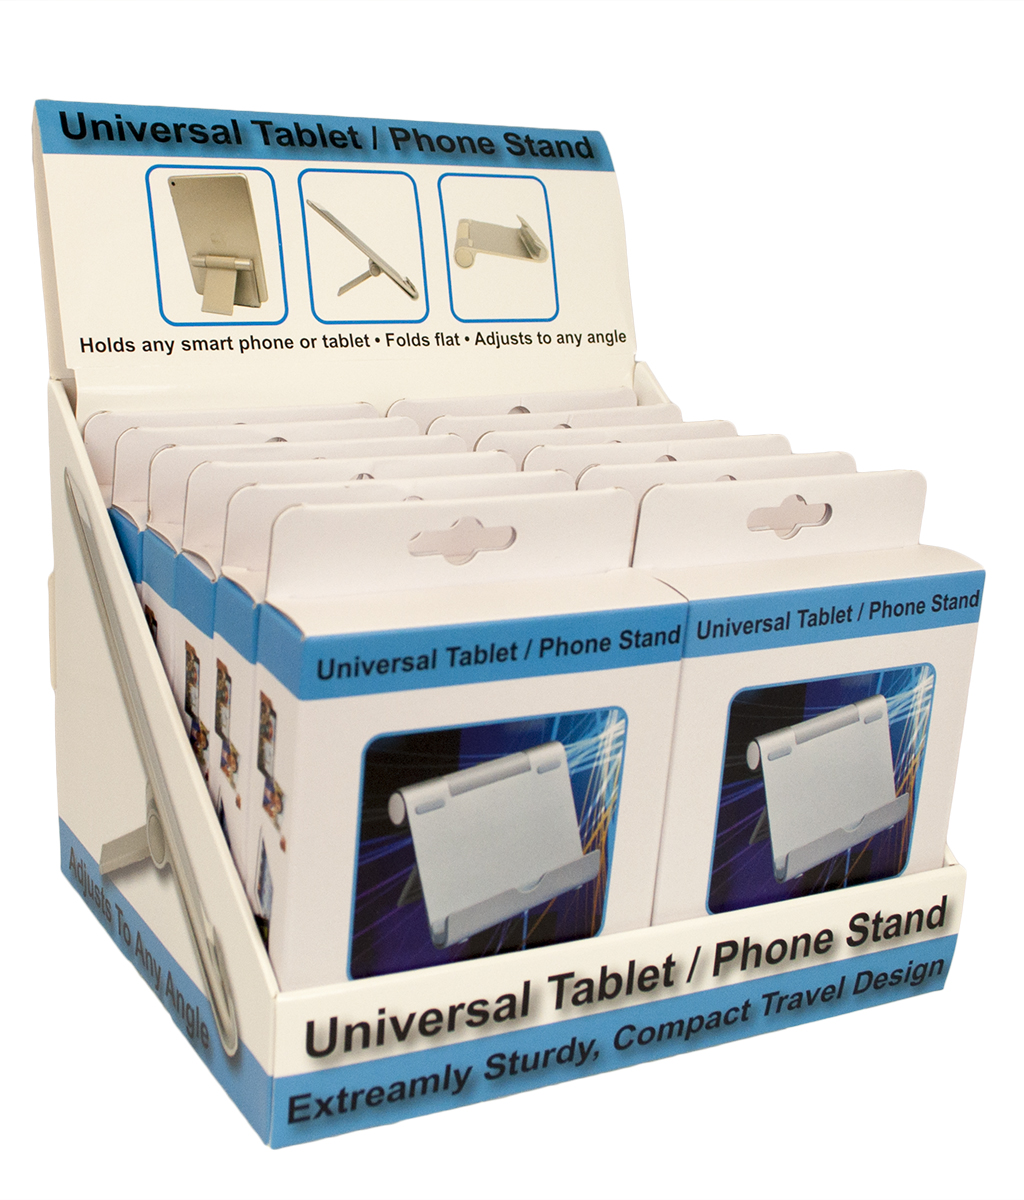 Universal Tablet/Phone Stand display